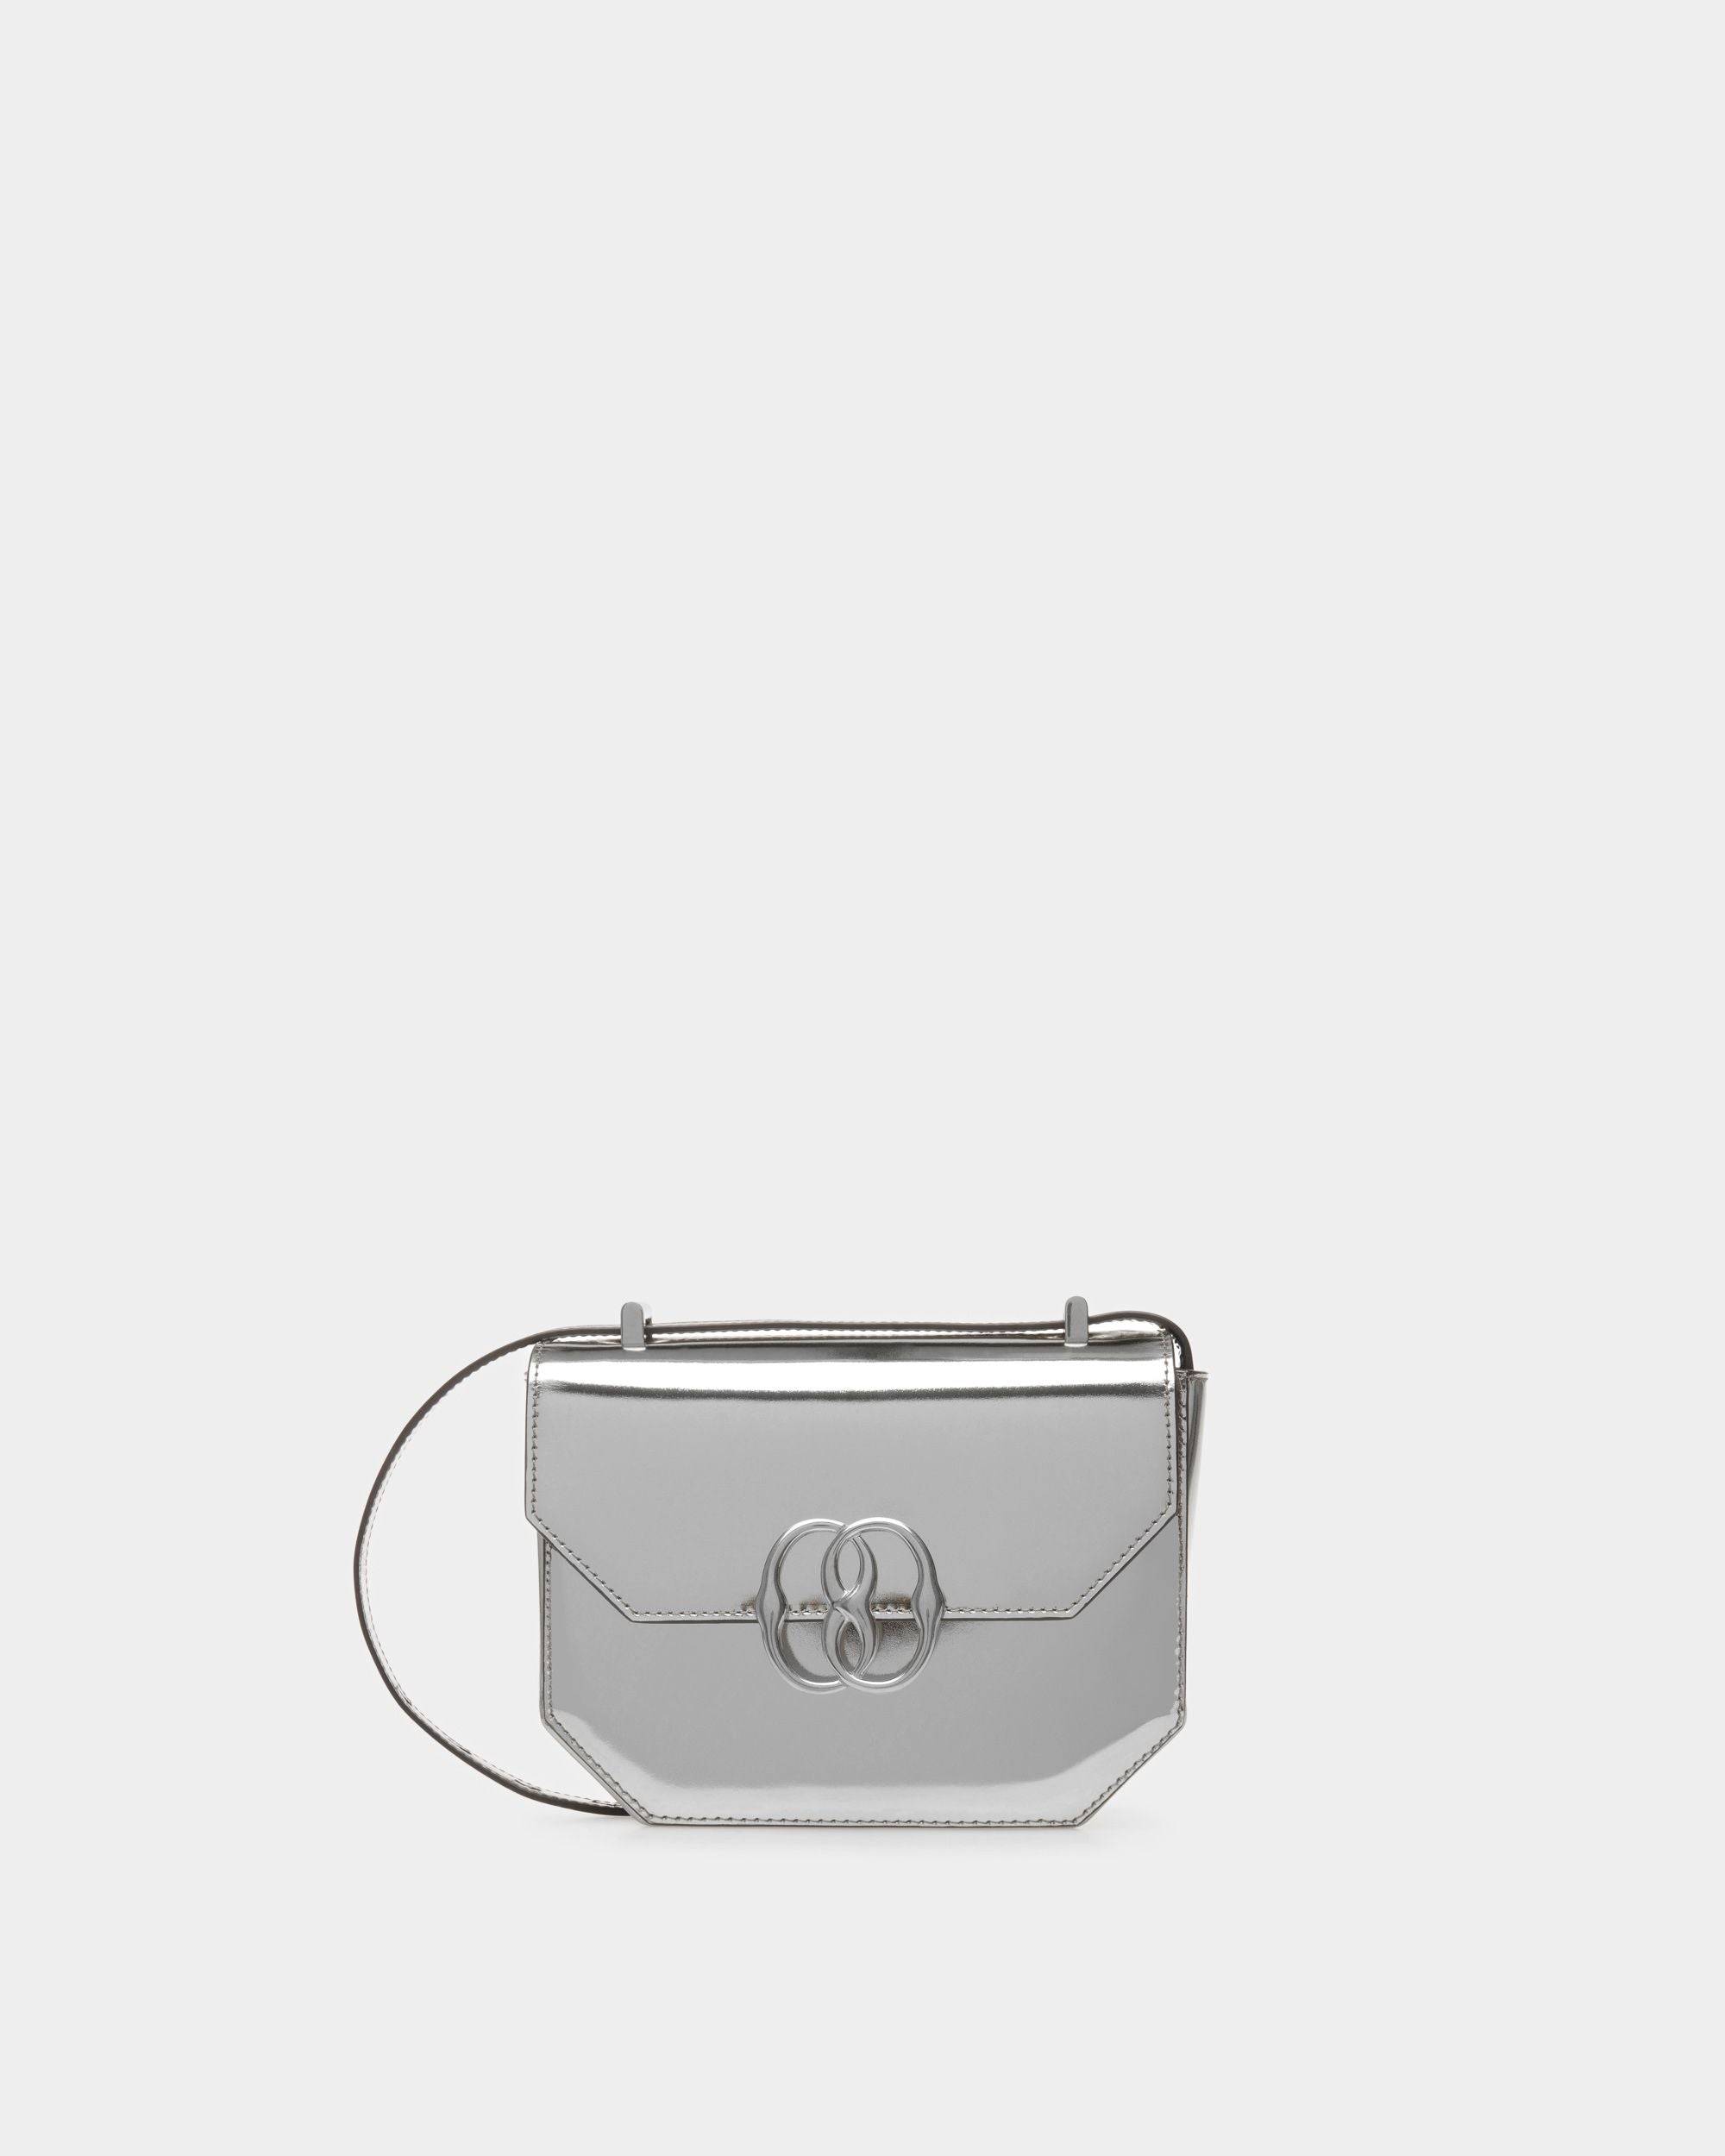 Women's Emblem Minibag In Silver Leather | Bally | Still Life Front